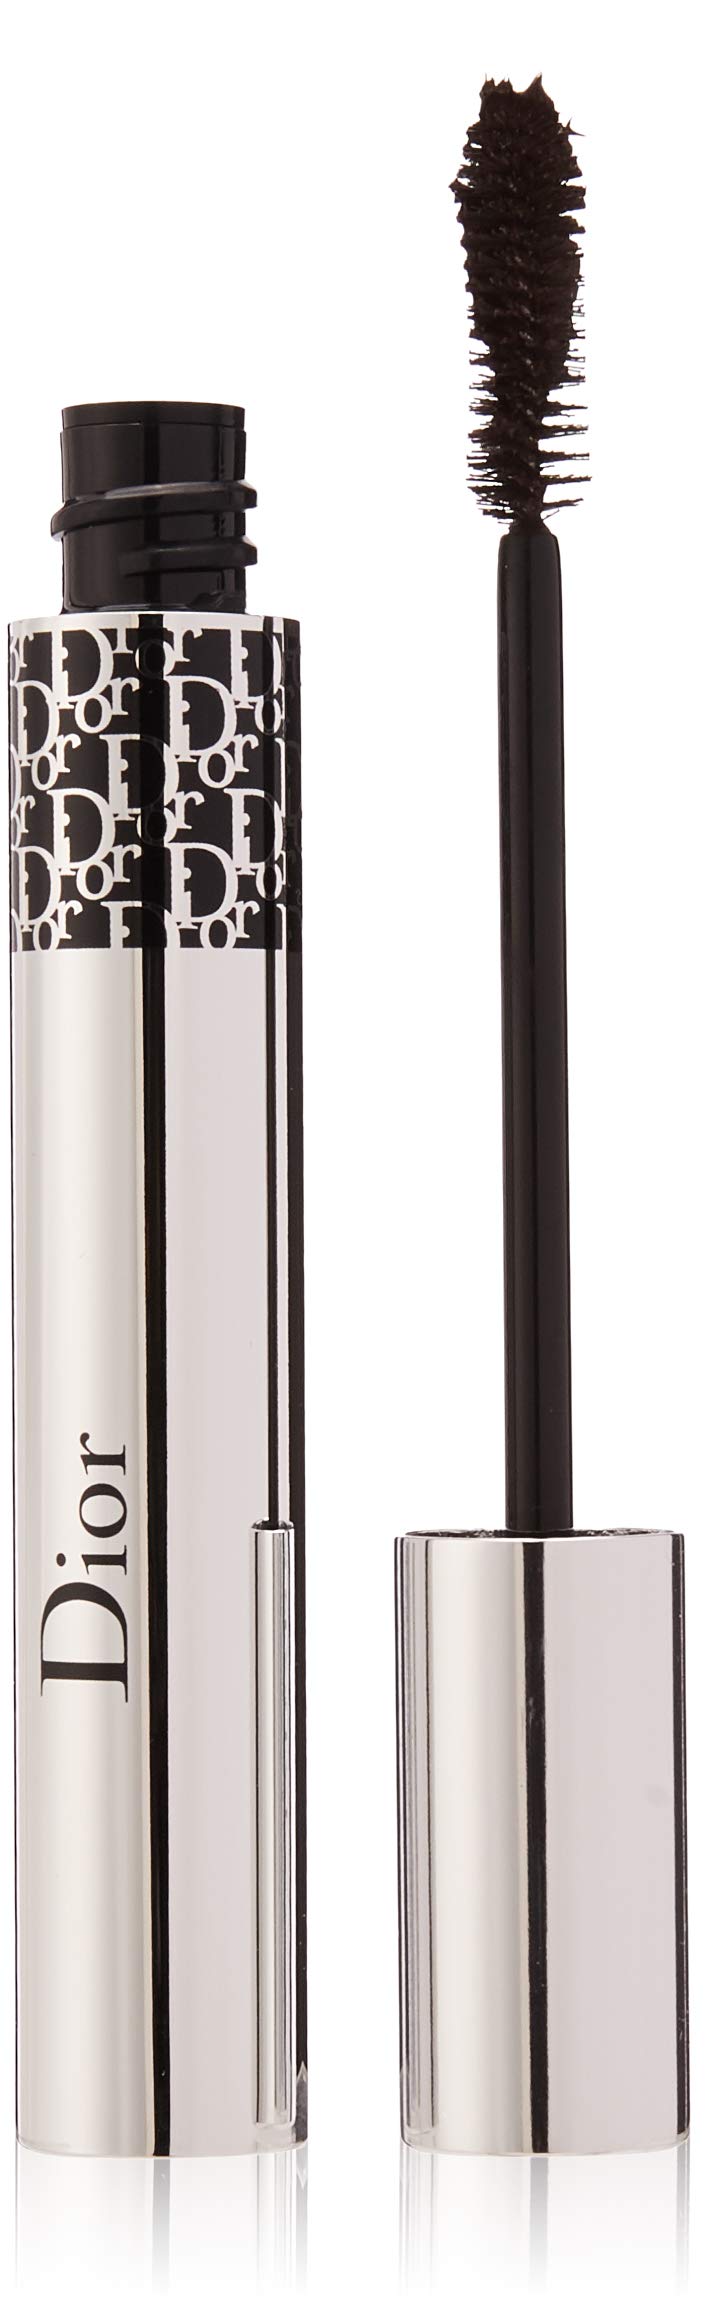 Dior Christian Dior Diorshow Iconic Overcurl Mascara for Women, 694 Brown, 0.33 Ounce